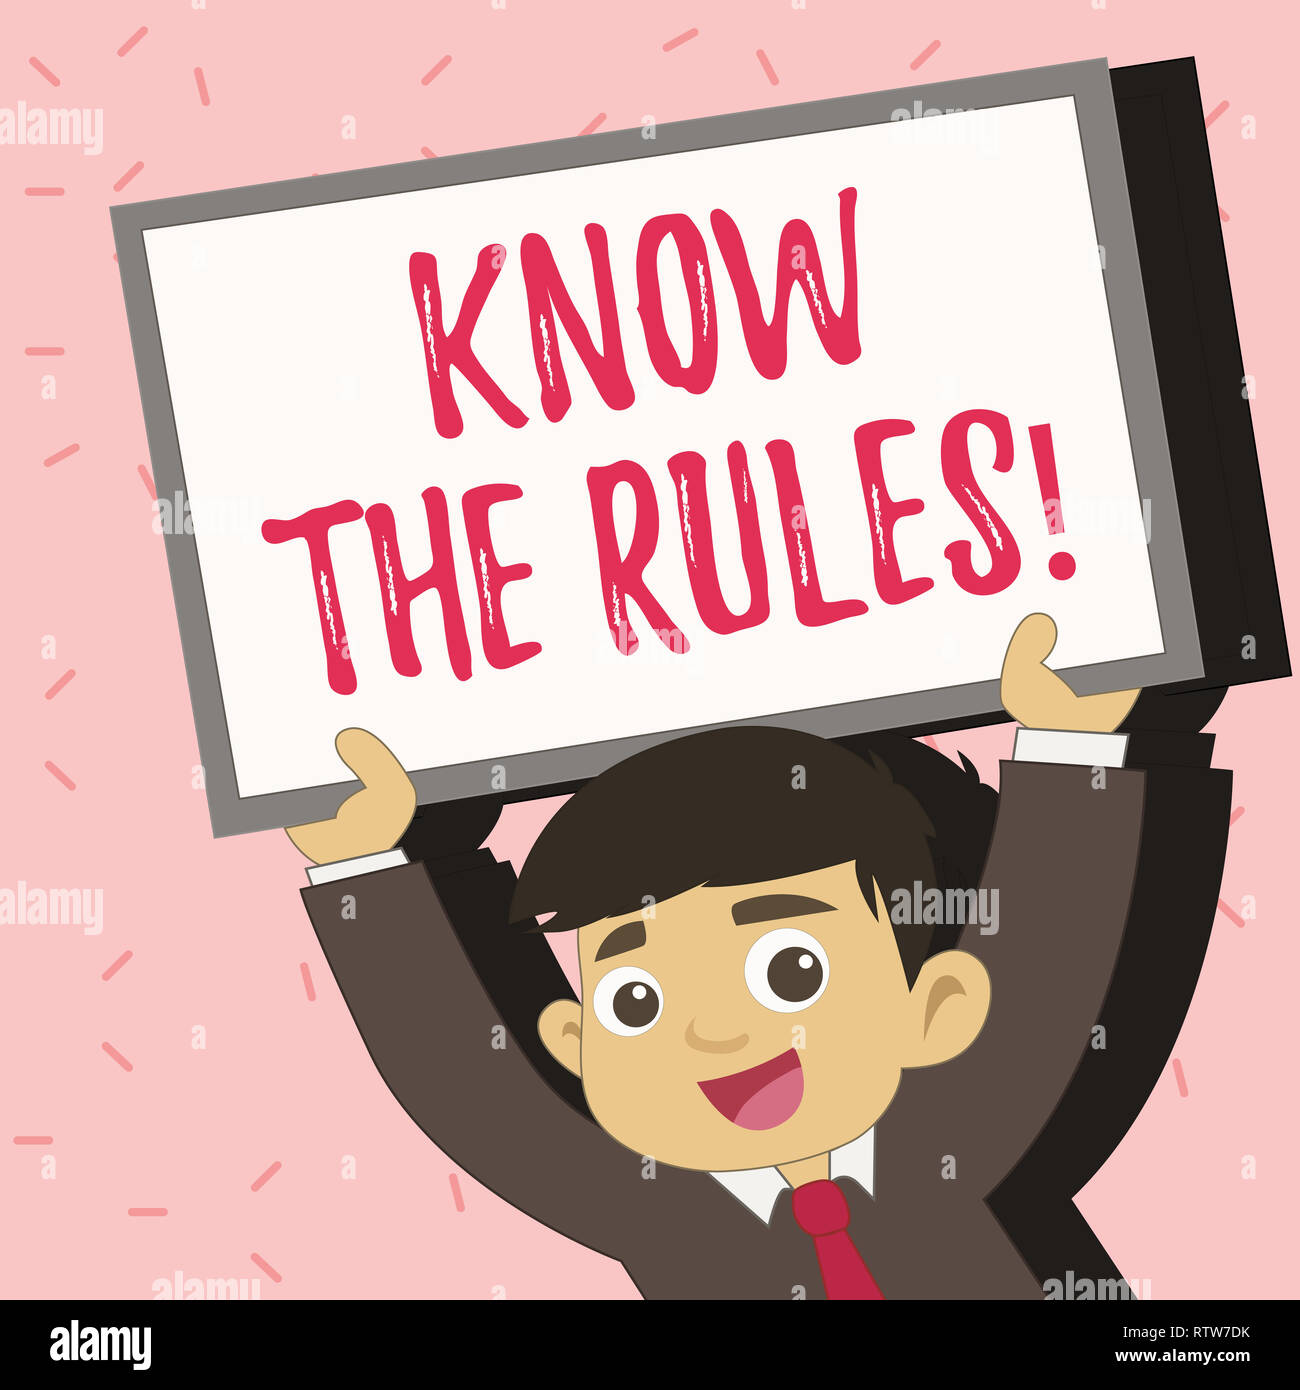 rules and regulations images